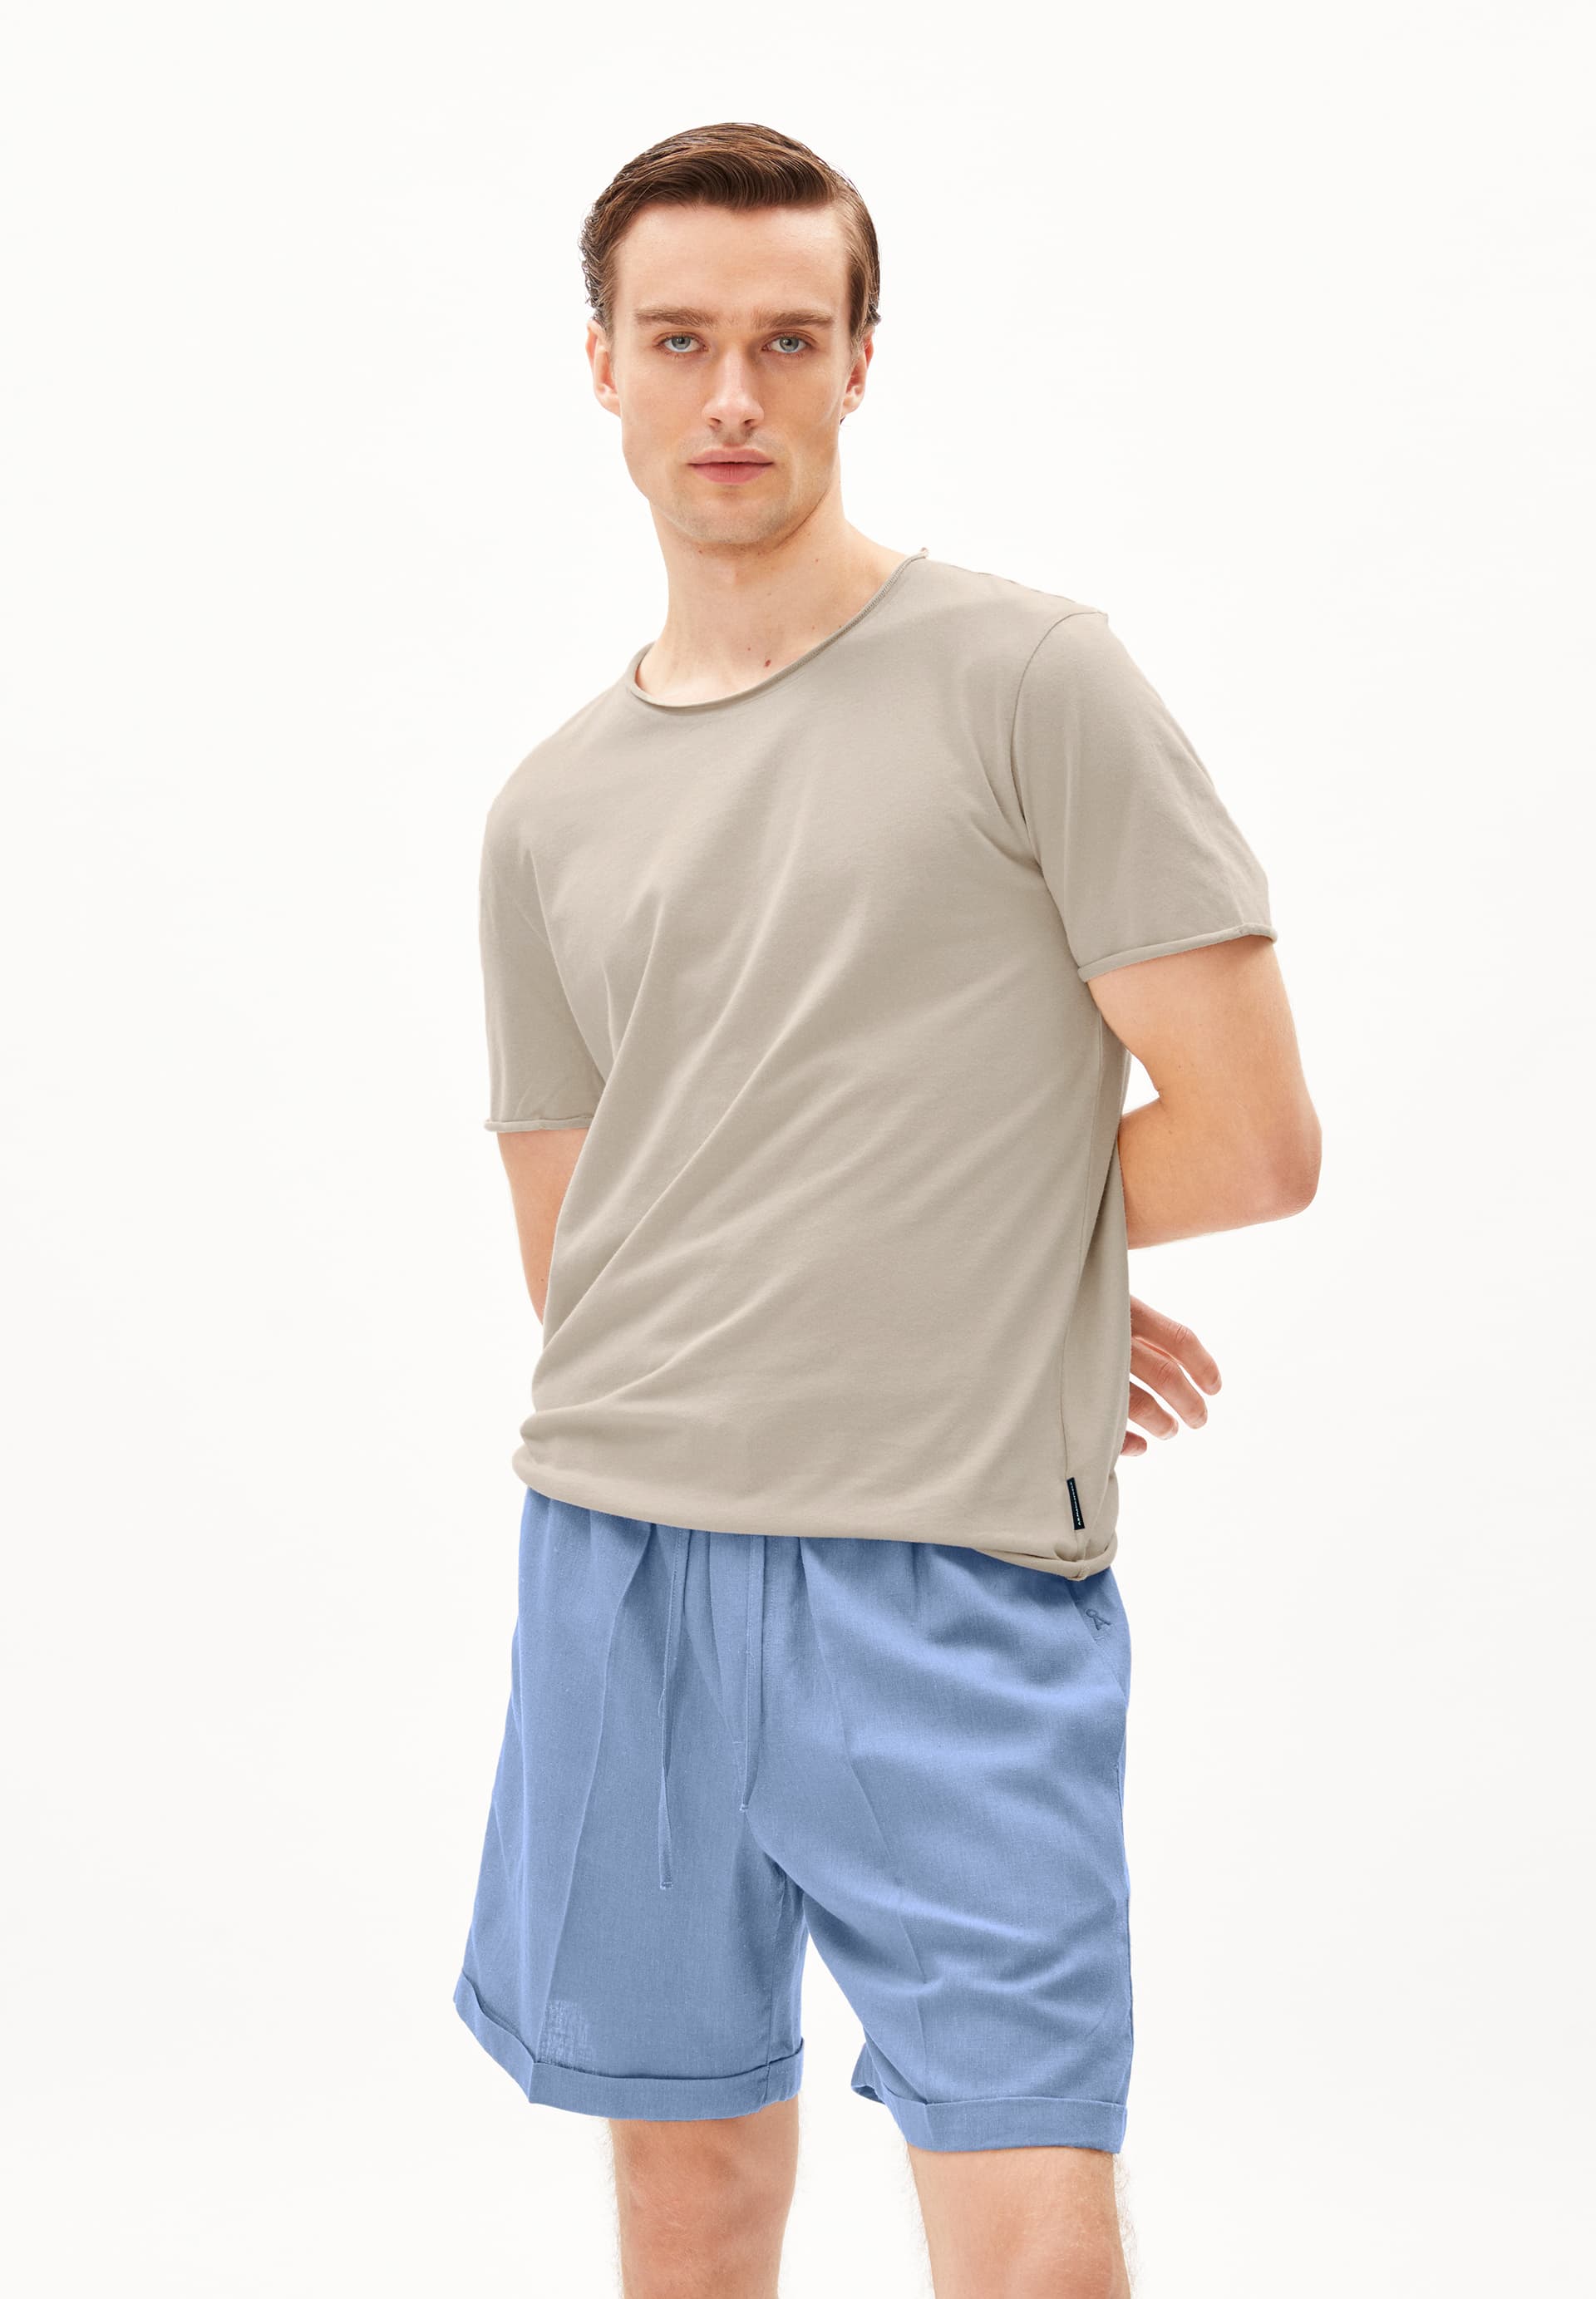 AAMON BRUSHED T-Shirt Regular Fit made of Organic Cotton